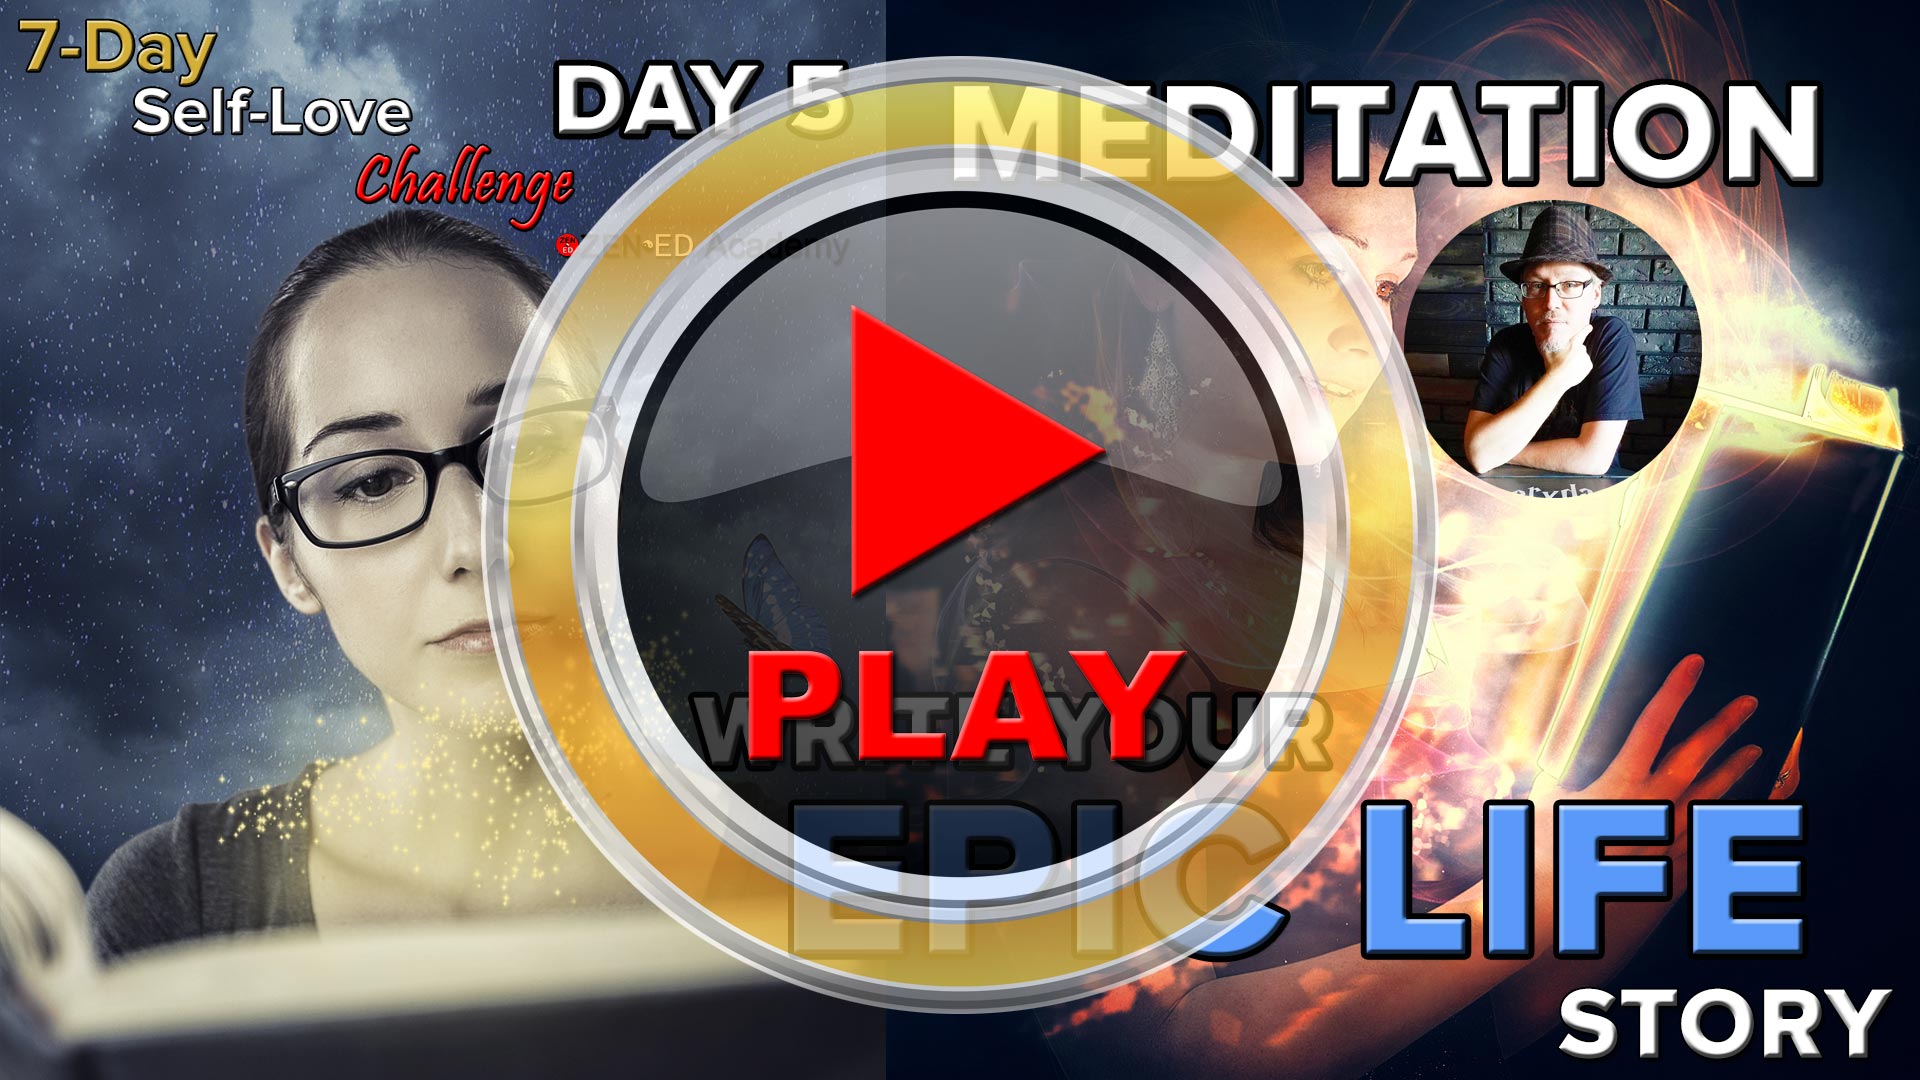 Play Meditation Day 5: Write Your Epic Life Story (Thumbnail) Zen Ed Academy's Free 7-Day Self-Love Challenge